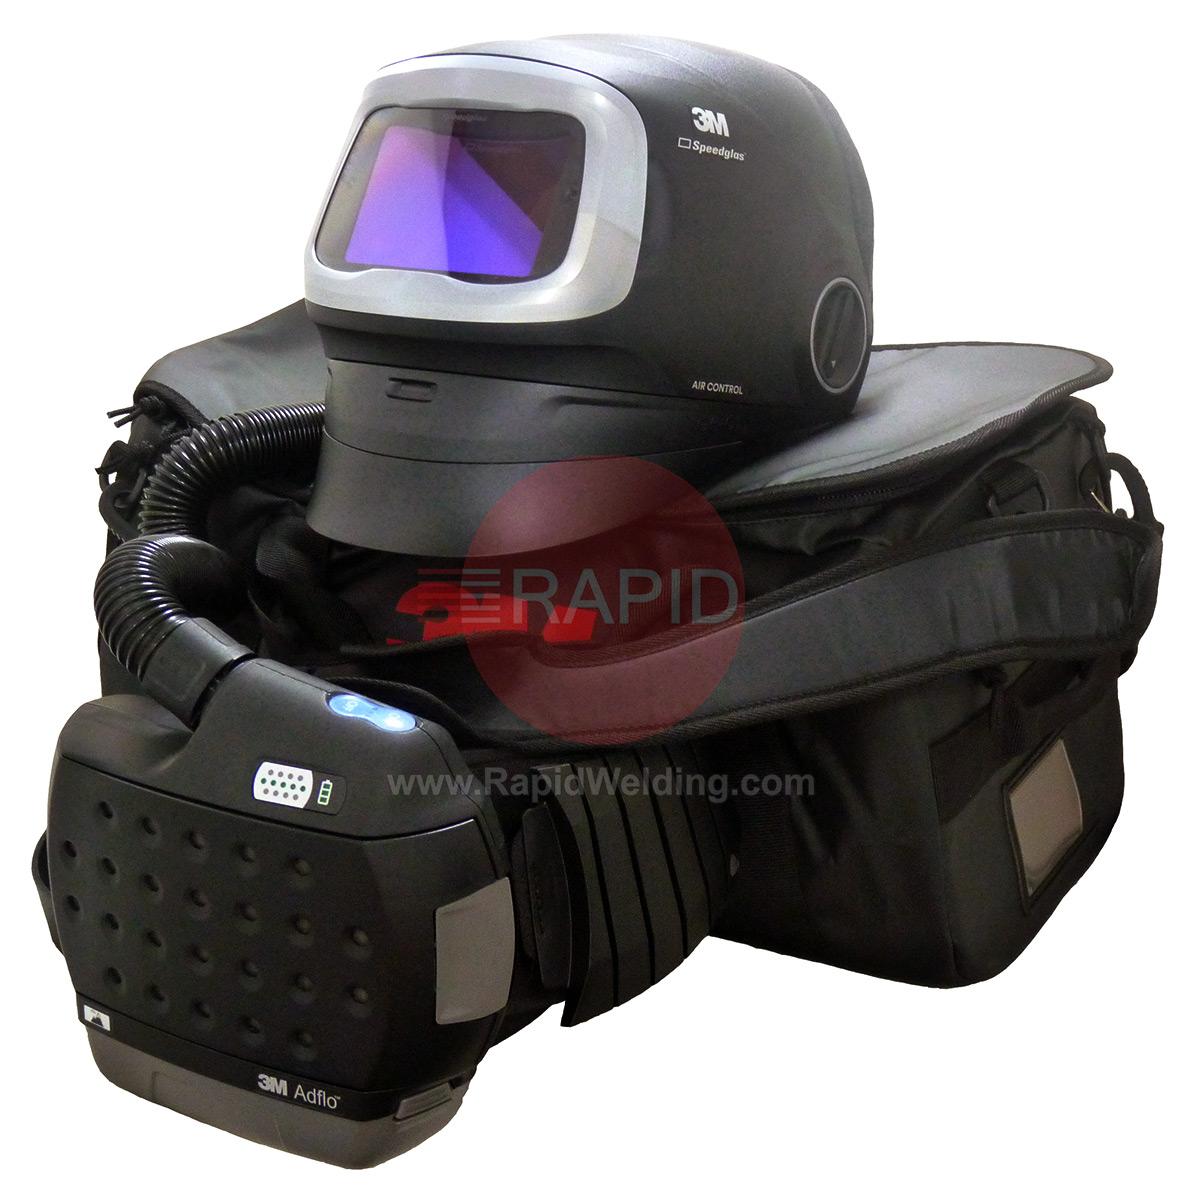 3M-617830  3M Speedglas G5-01 Heavy Duty Welding Helmet with Adflo PAPR System, G5-01VC Variable Colour Filter & FREE Starter Kit 46-1101-30iVC